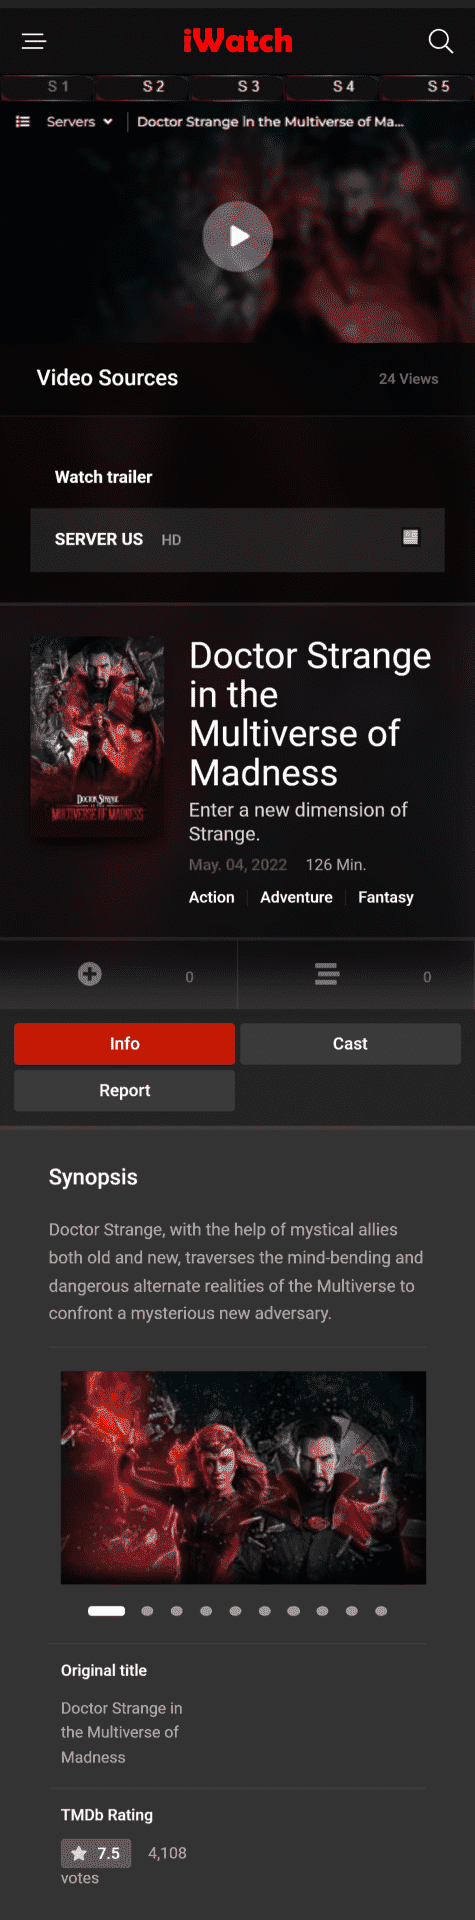 imoviewatch.com_movies_doctor-strange-in-the-multiverse-of-madness_(iPhone 12 Pro).png